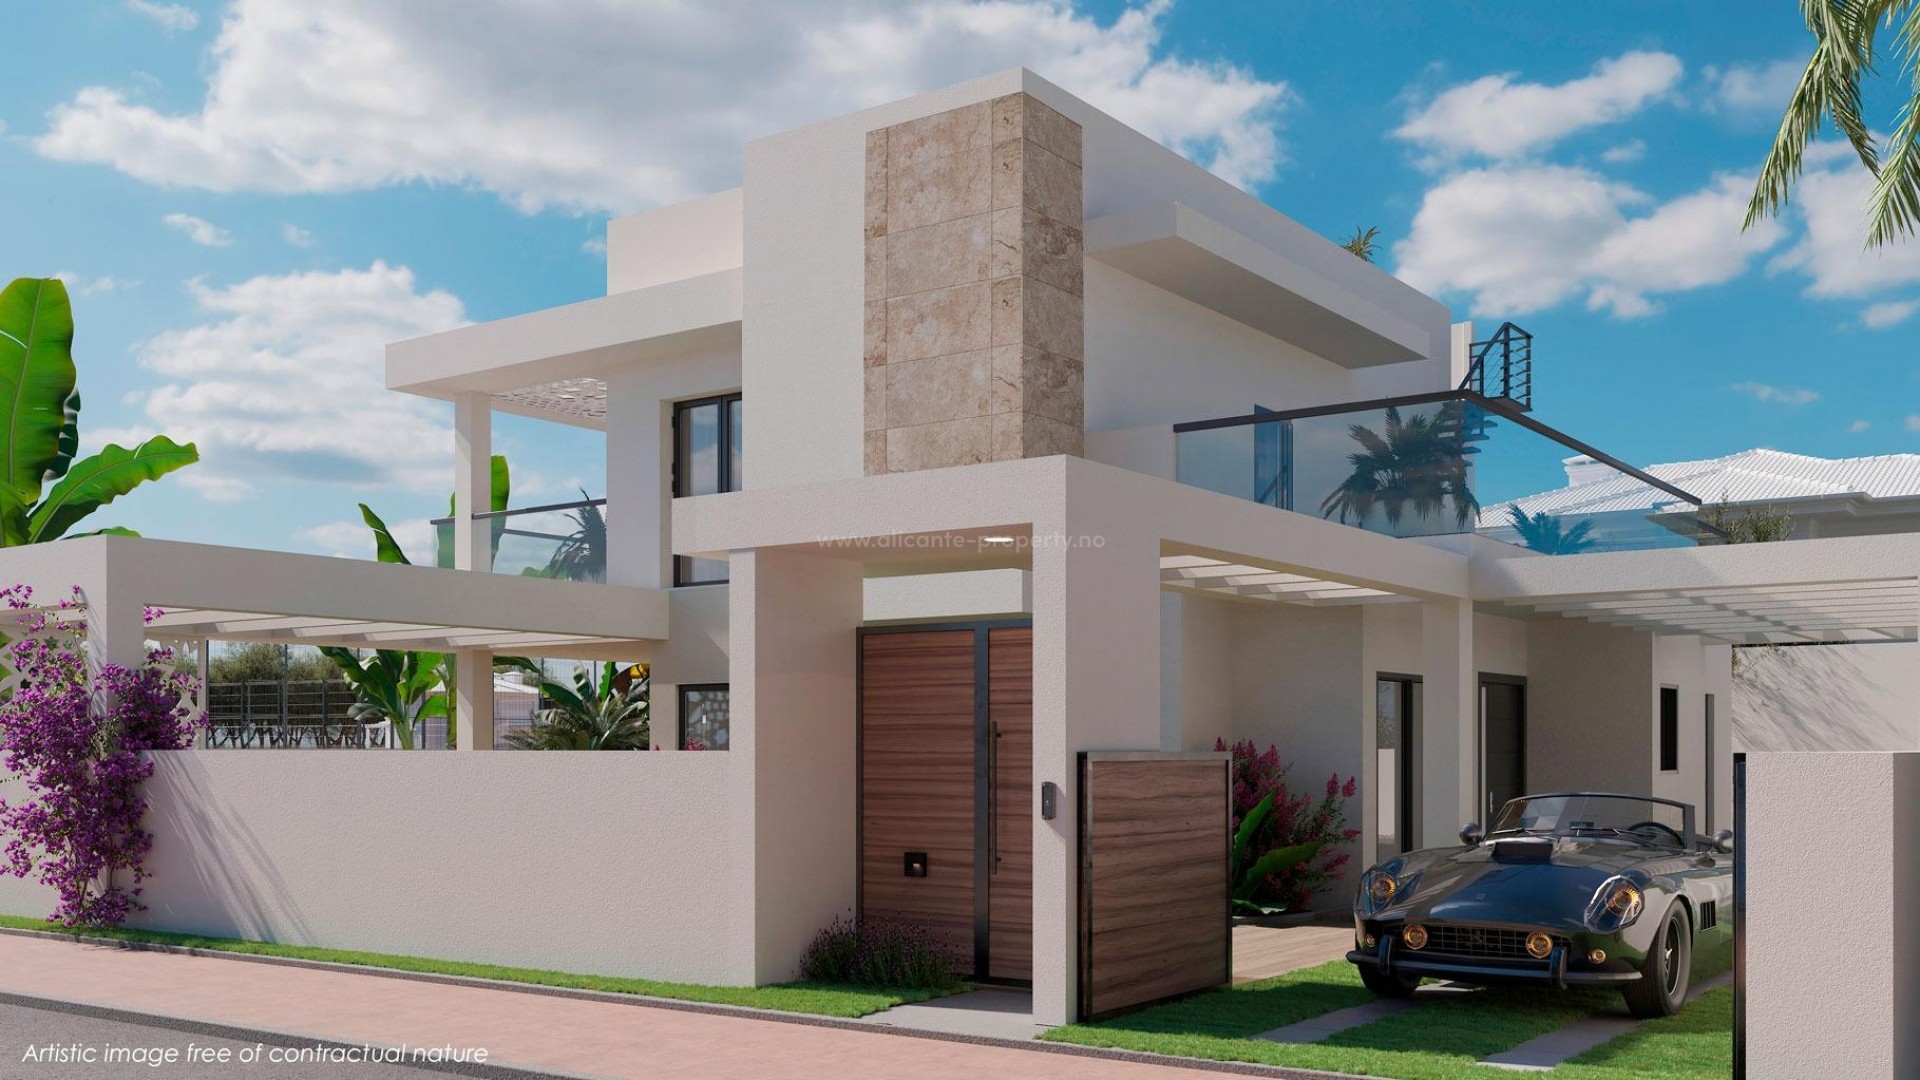 New built house/villa in Ciudad Quesad, 3 bedrooms and 3 bathrooms, terrace, solarium, private garden with swimming pool. Close to La Marquesa golf course and all services